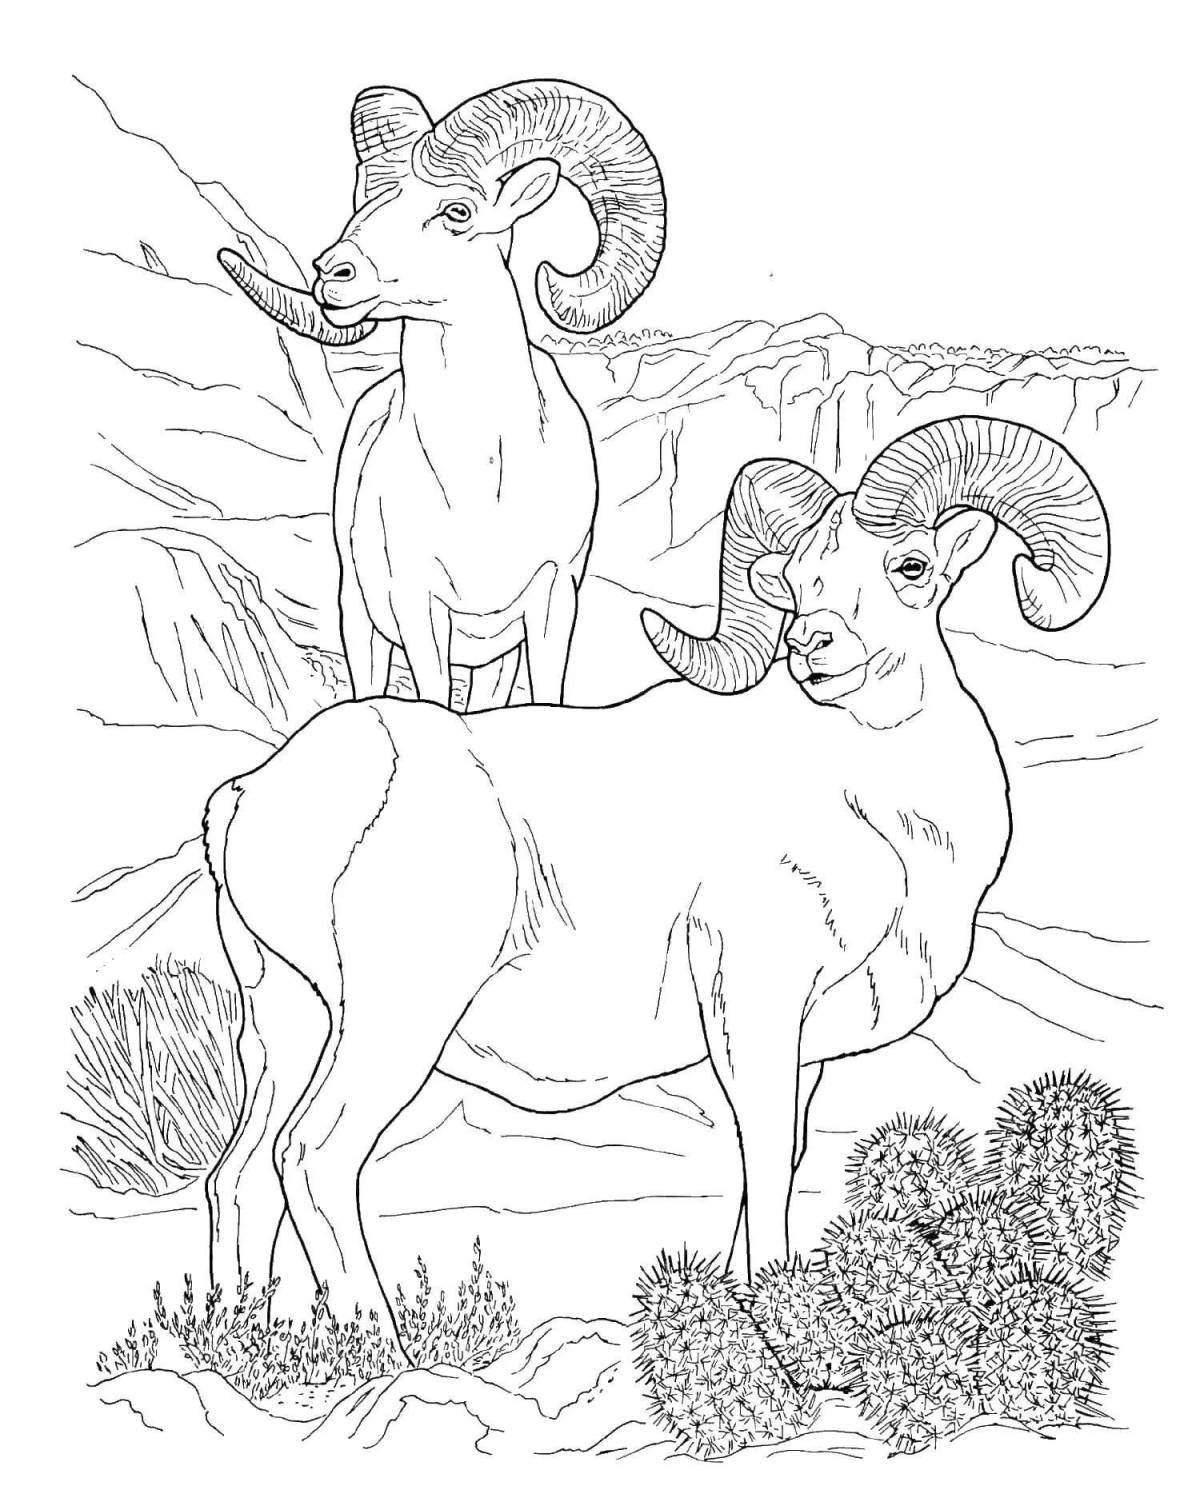 Funny Russian animal coloring book